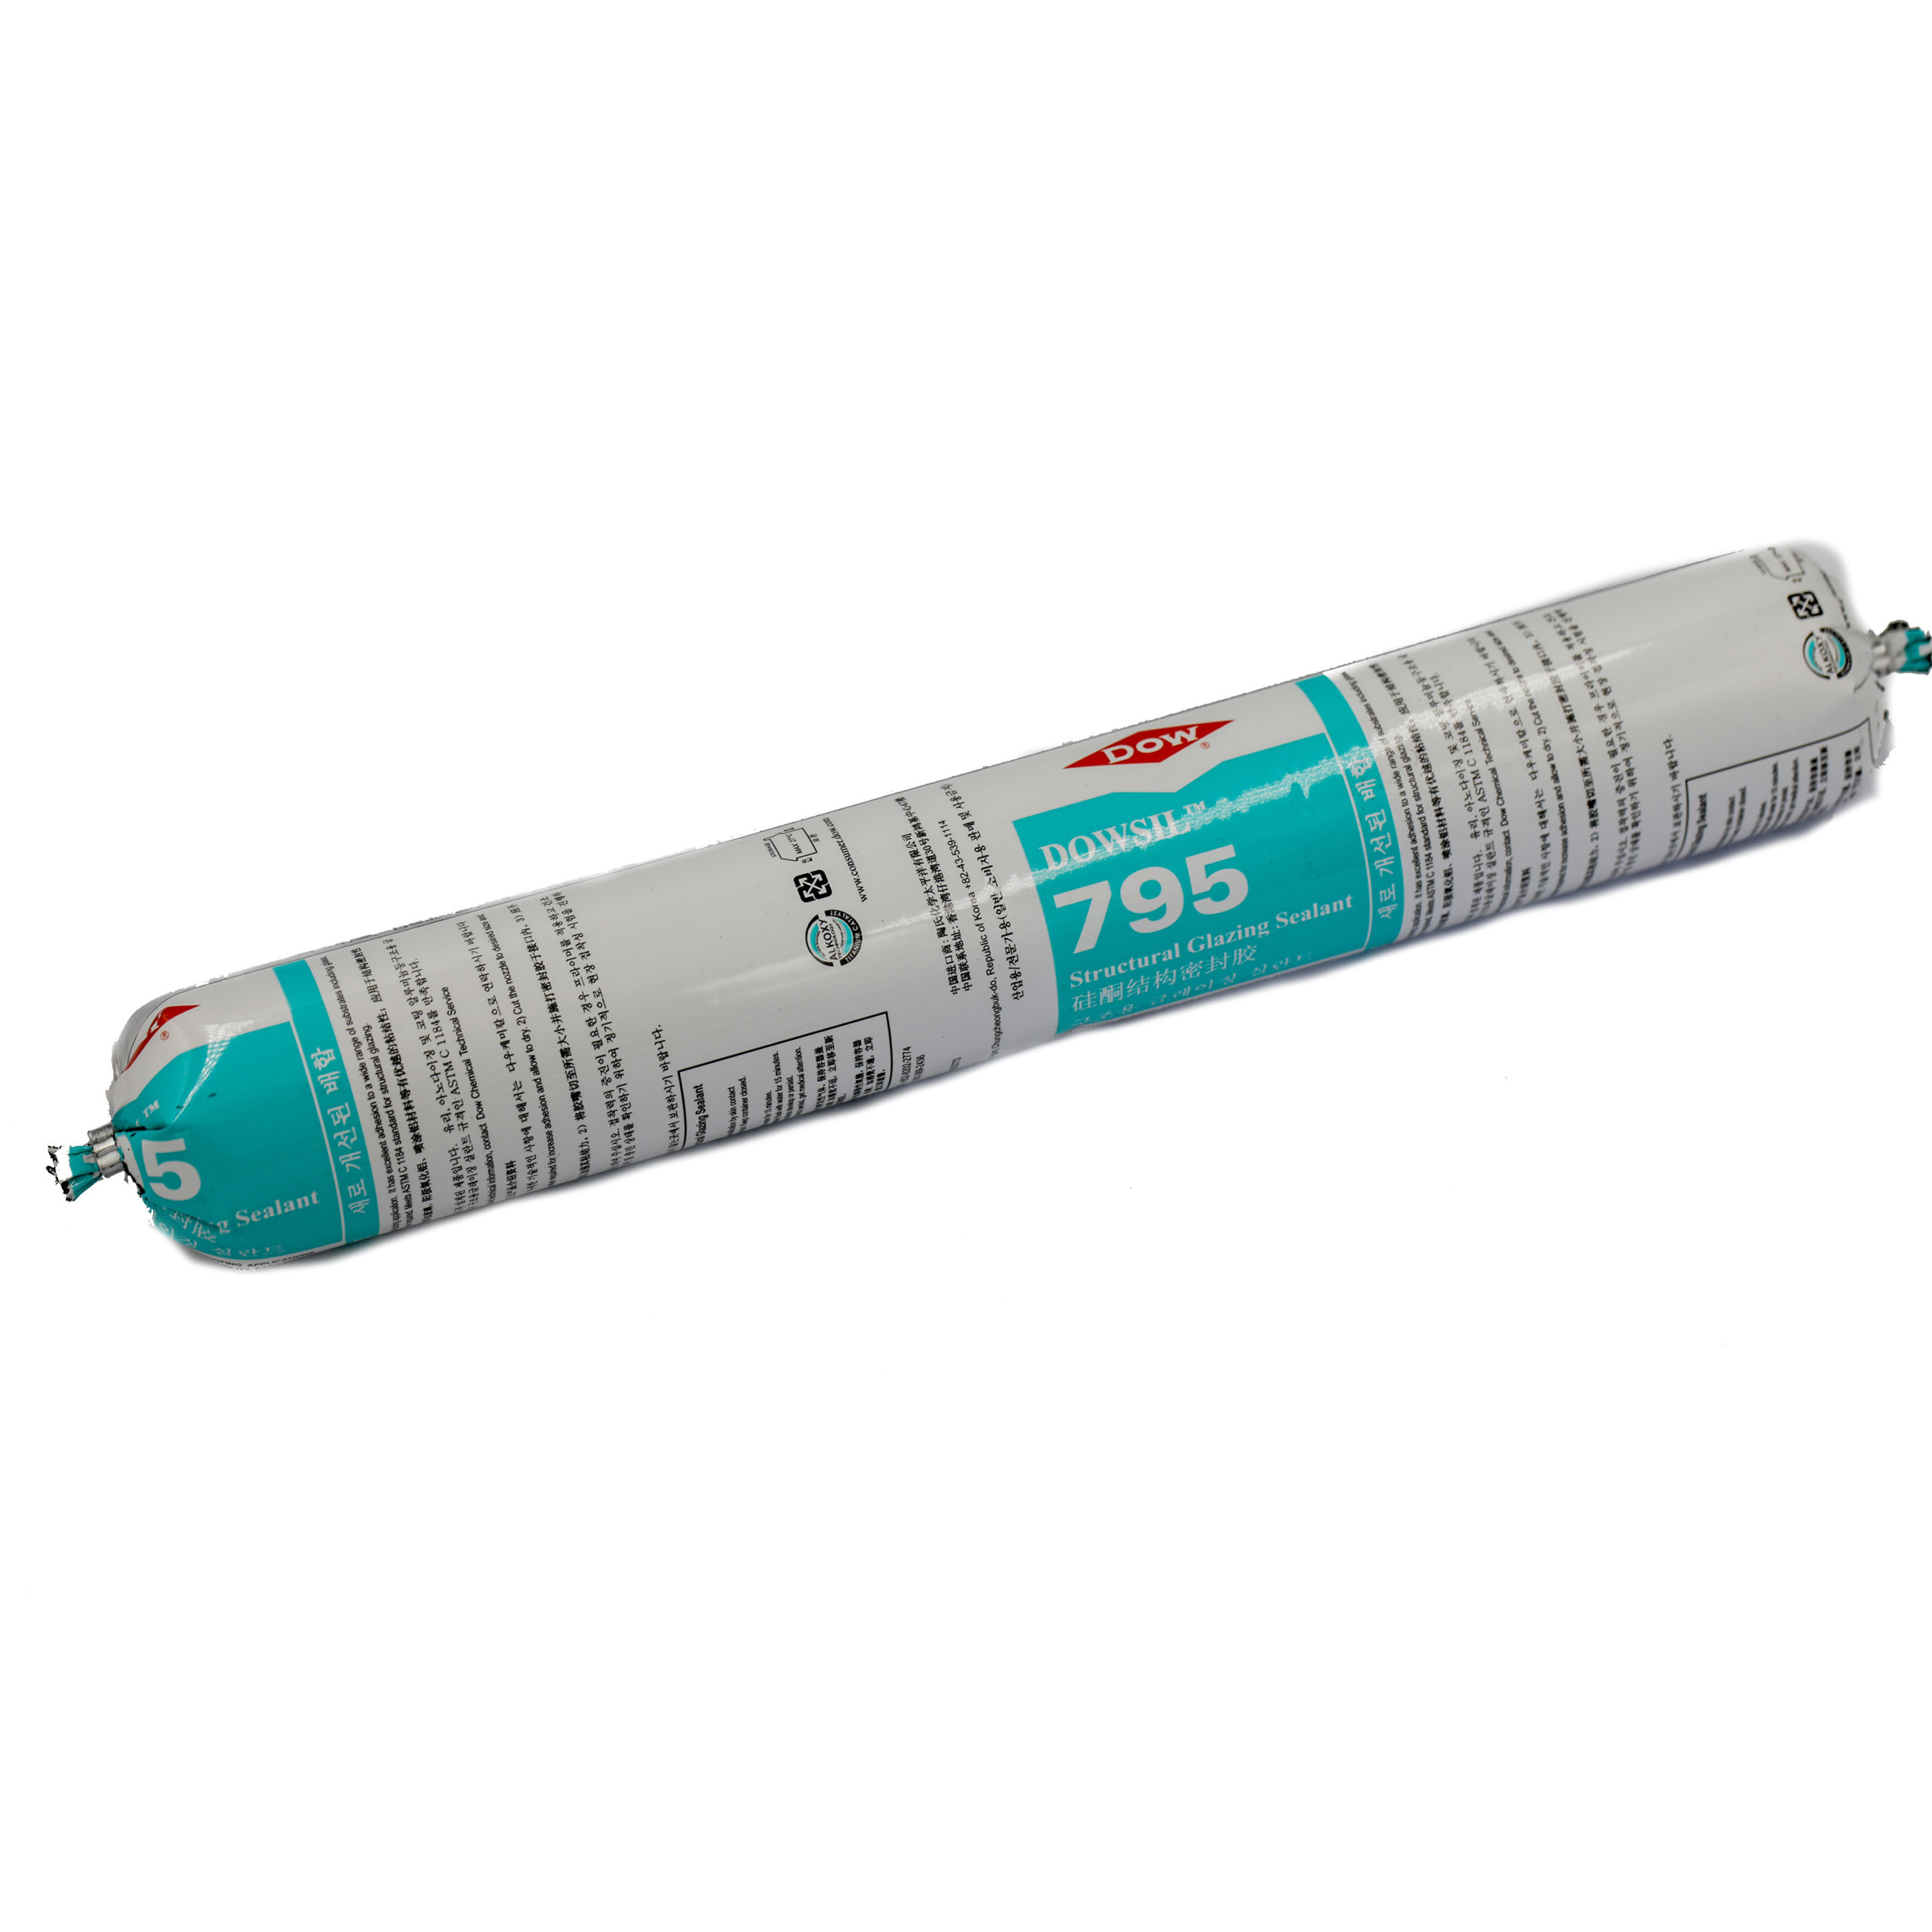 DC795 600 Dowsil 795 Structural Silicone 600ml 1 scaled